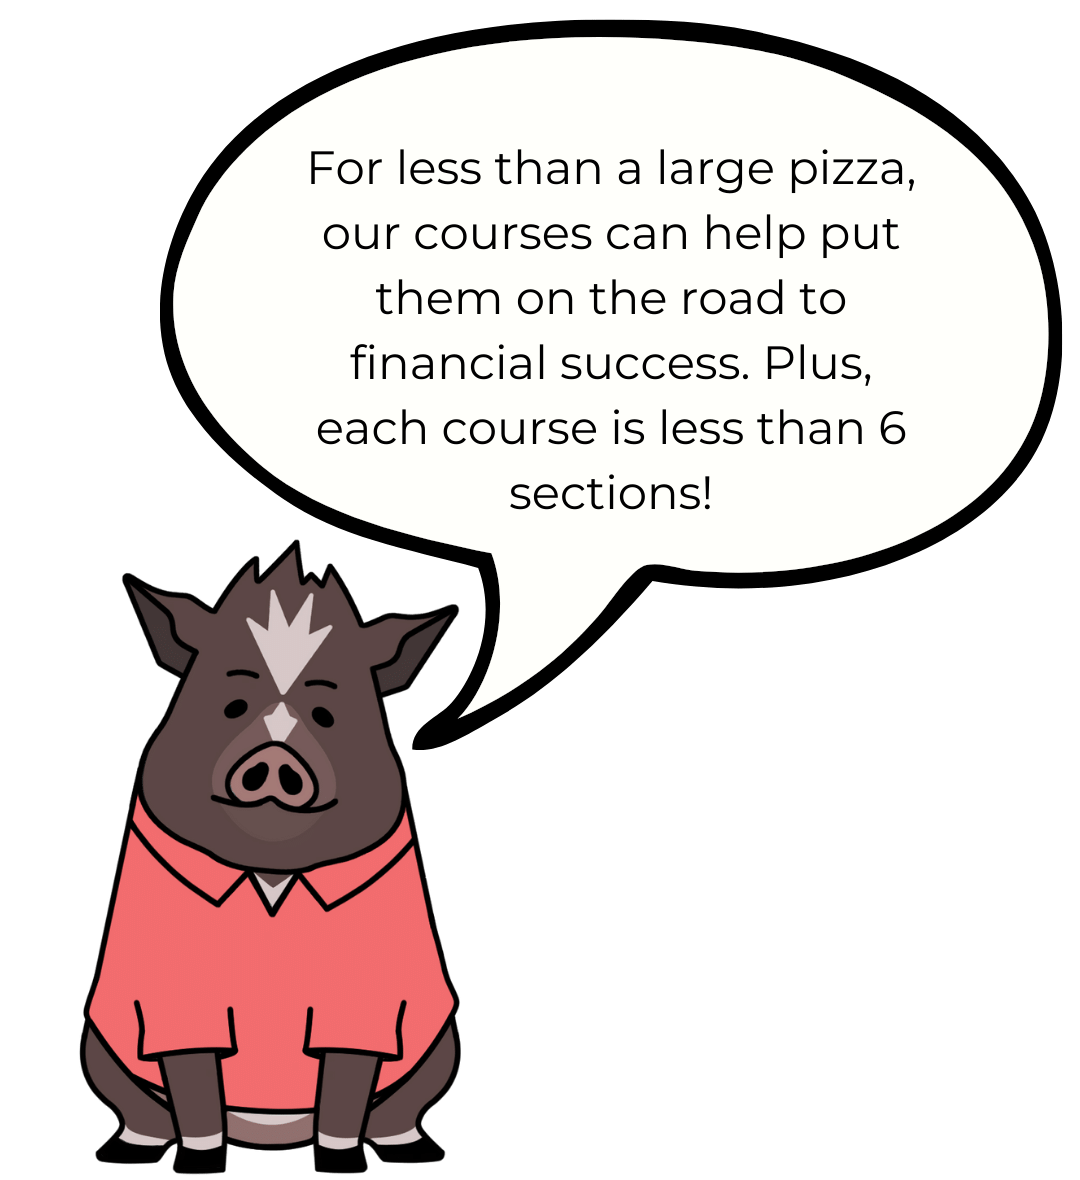 Cartoon drawing of Winston with a speech bubble that says, "For less than a large pizza, our courses can help put them on the road to financial success. Plus, each course is less than 6 sections!"